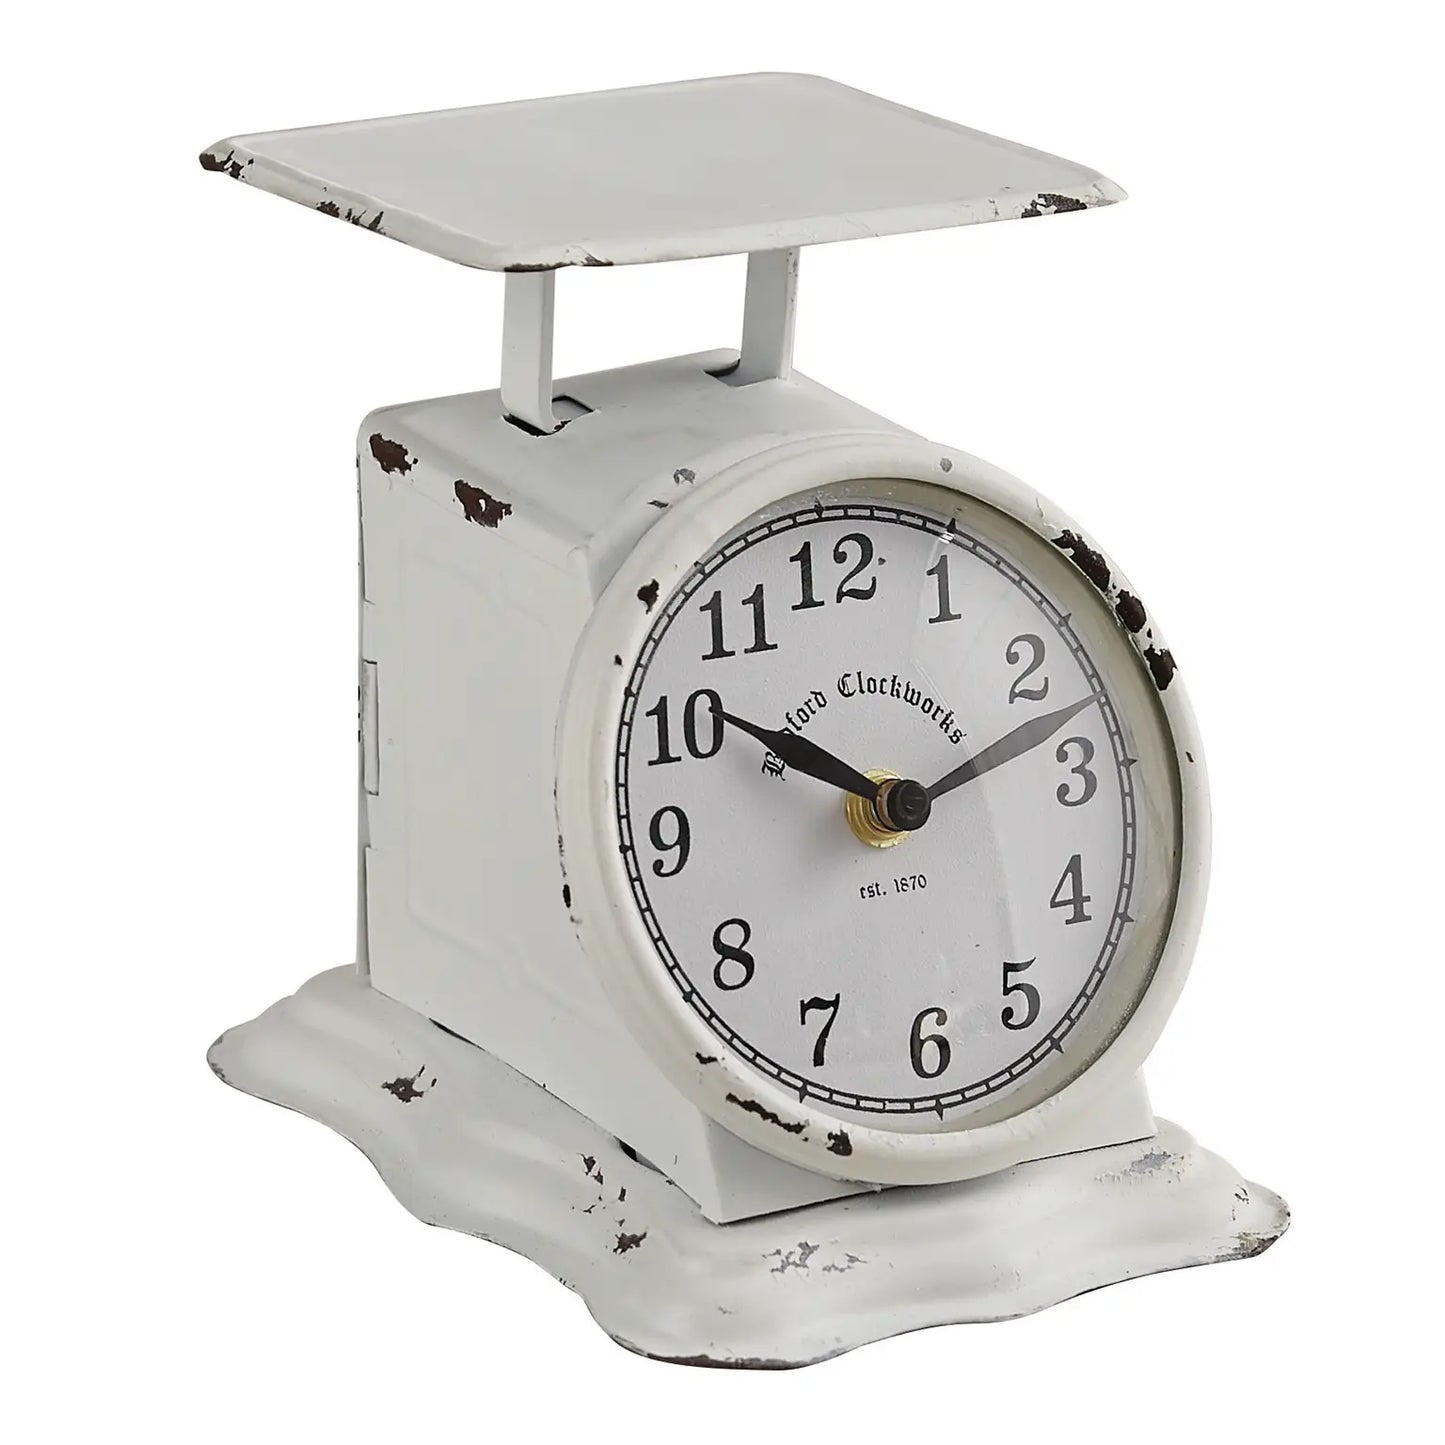 Postage Scale Clock